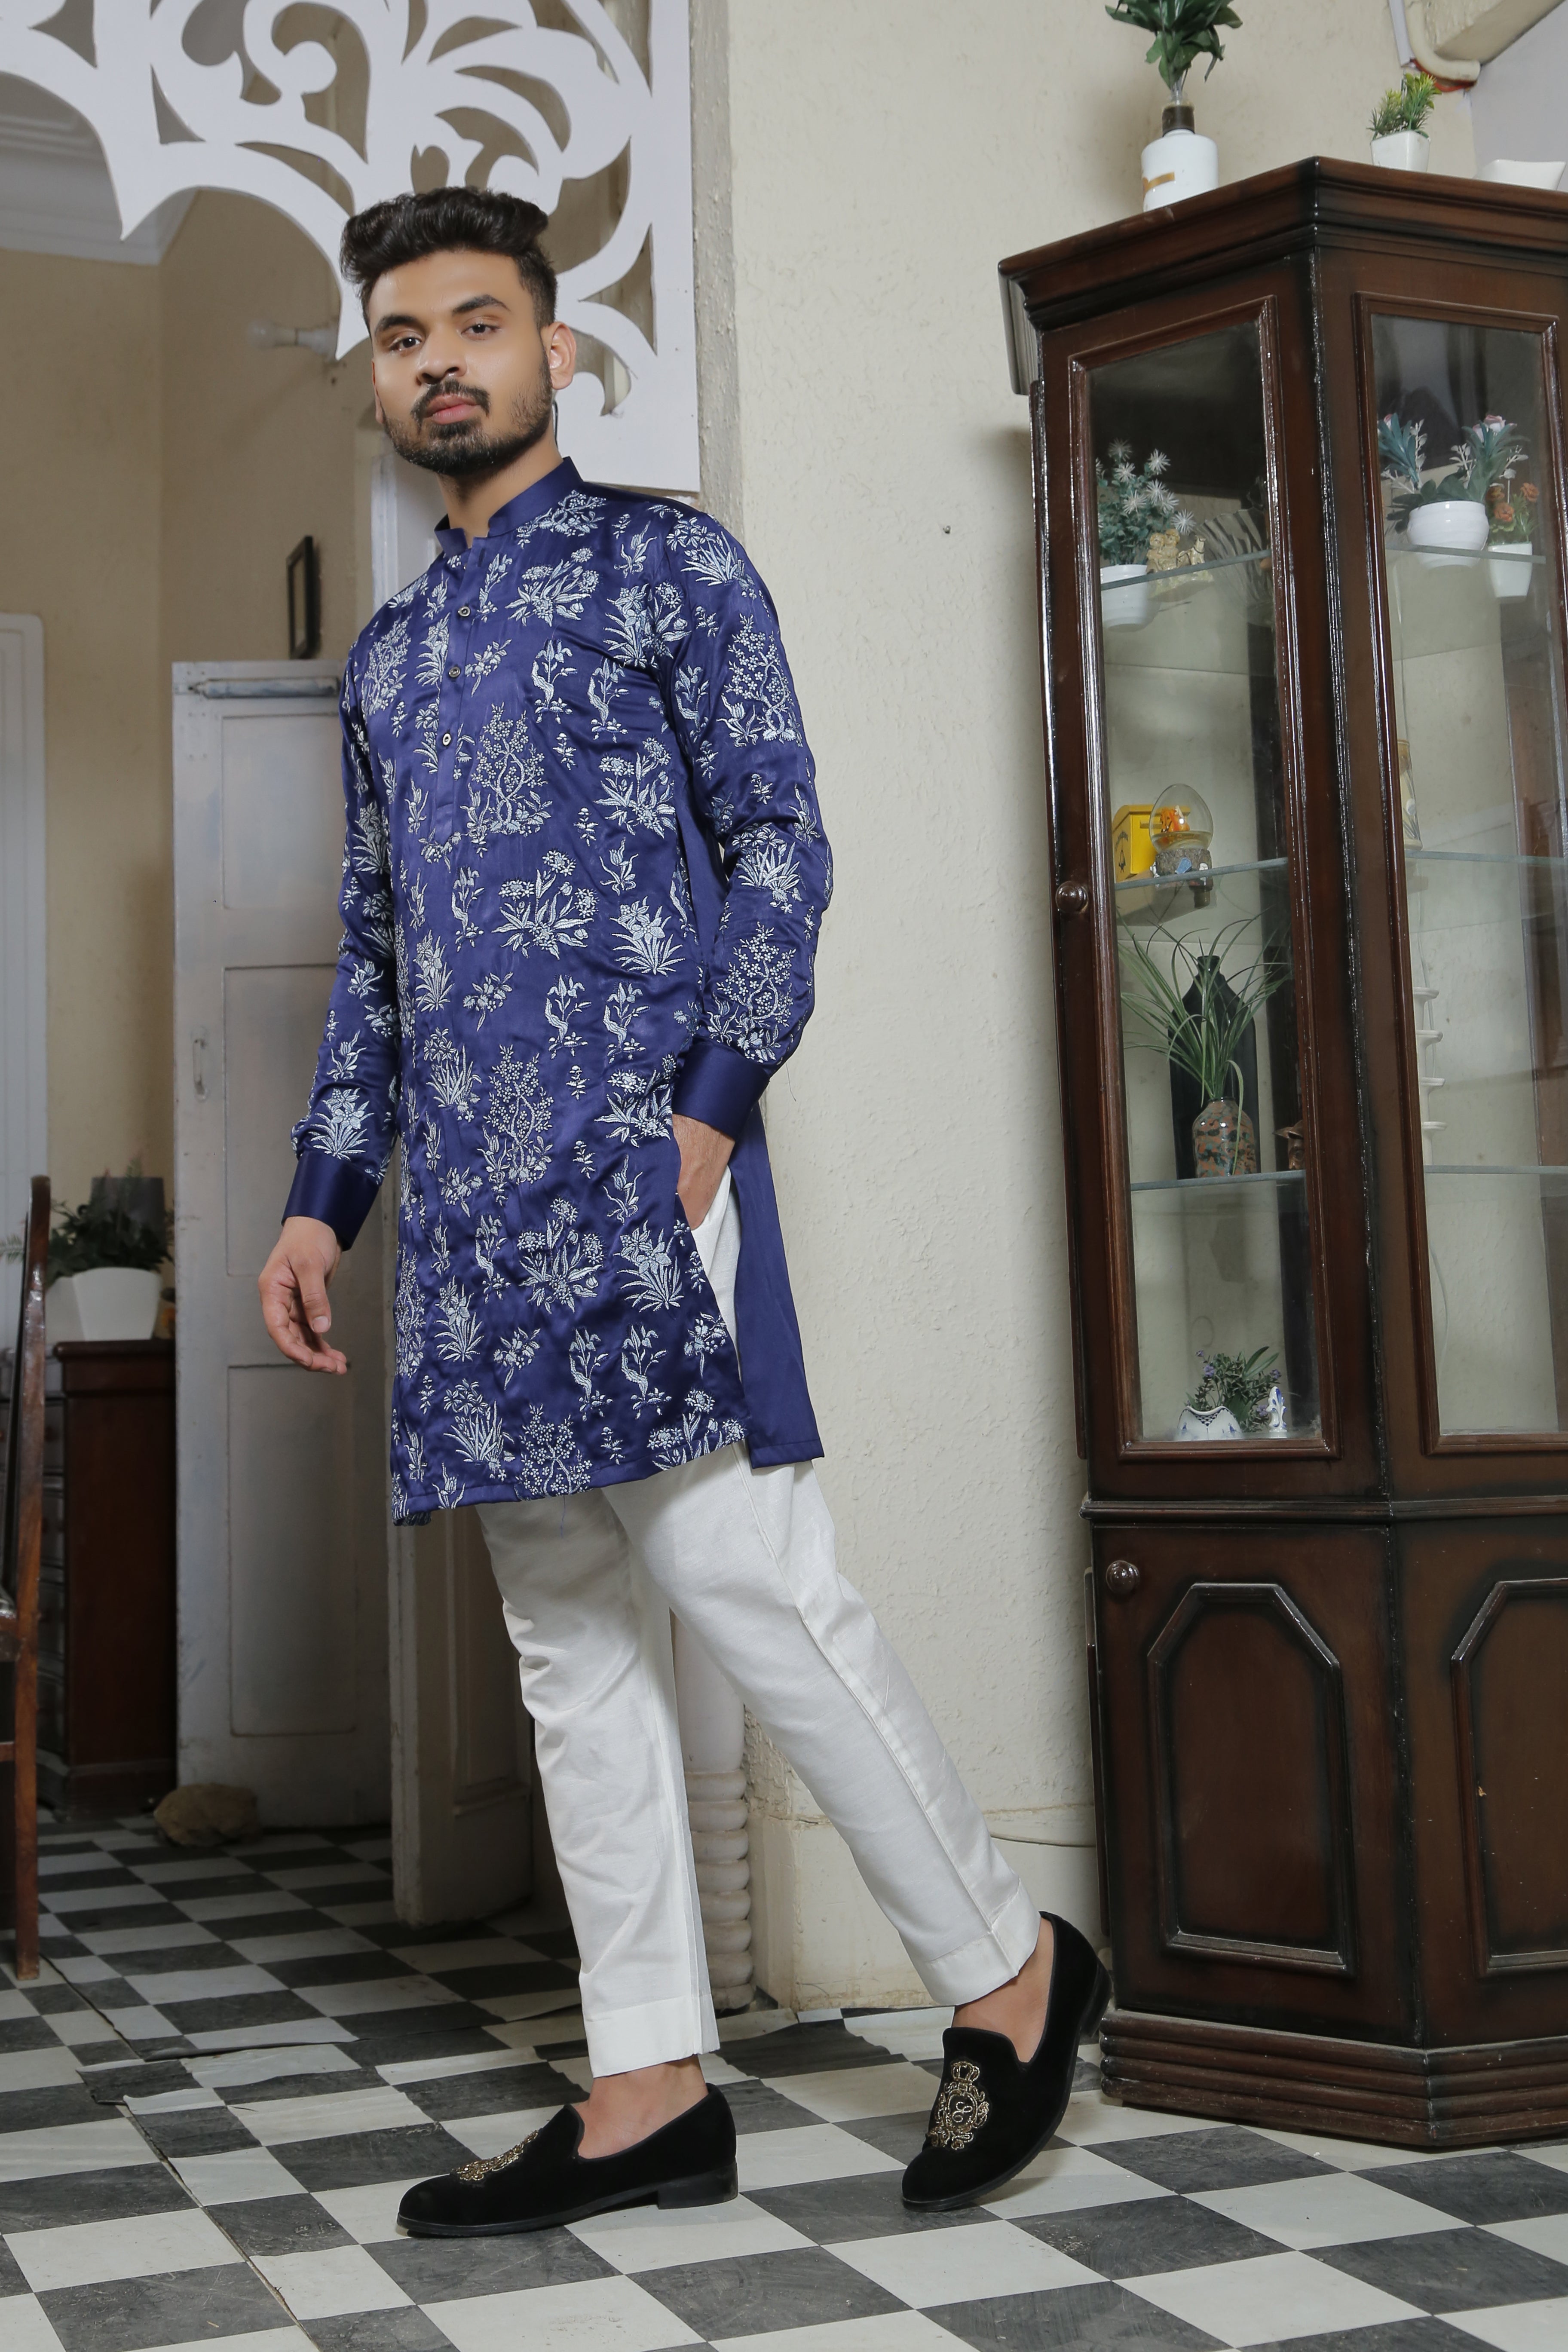 ER EMB 563 Bluish Color with Floral Embroided Kurta With White Trouser